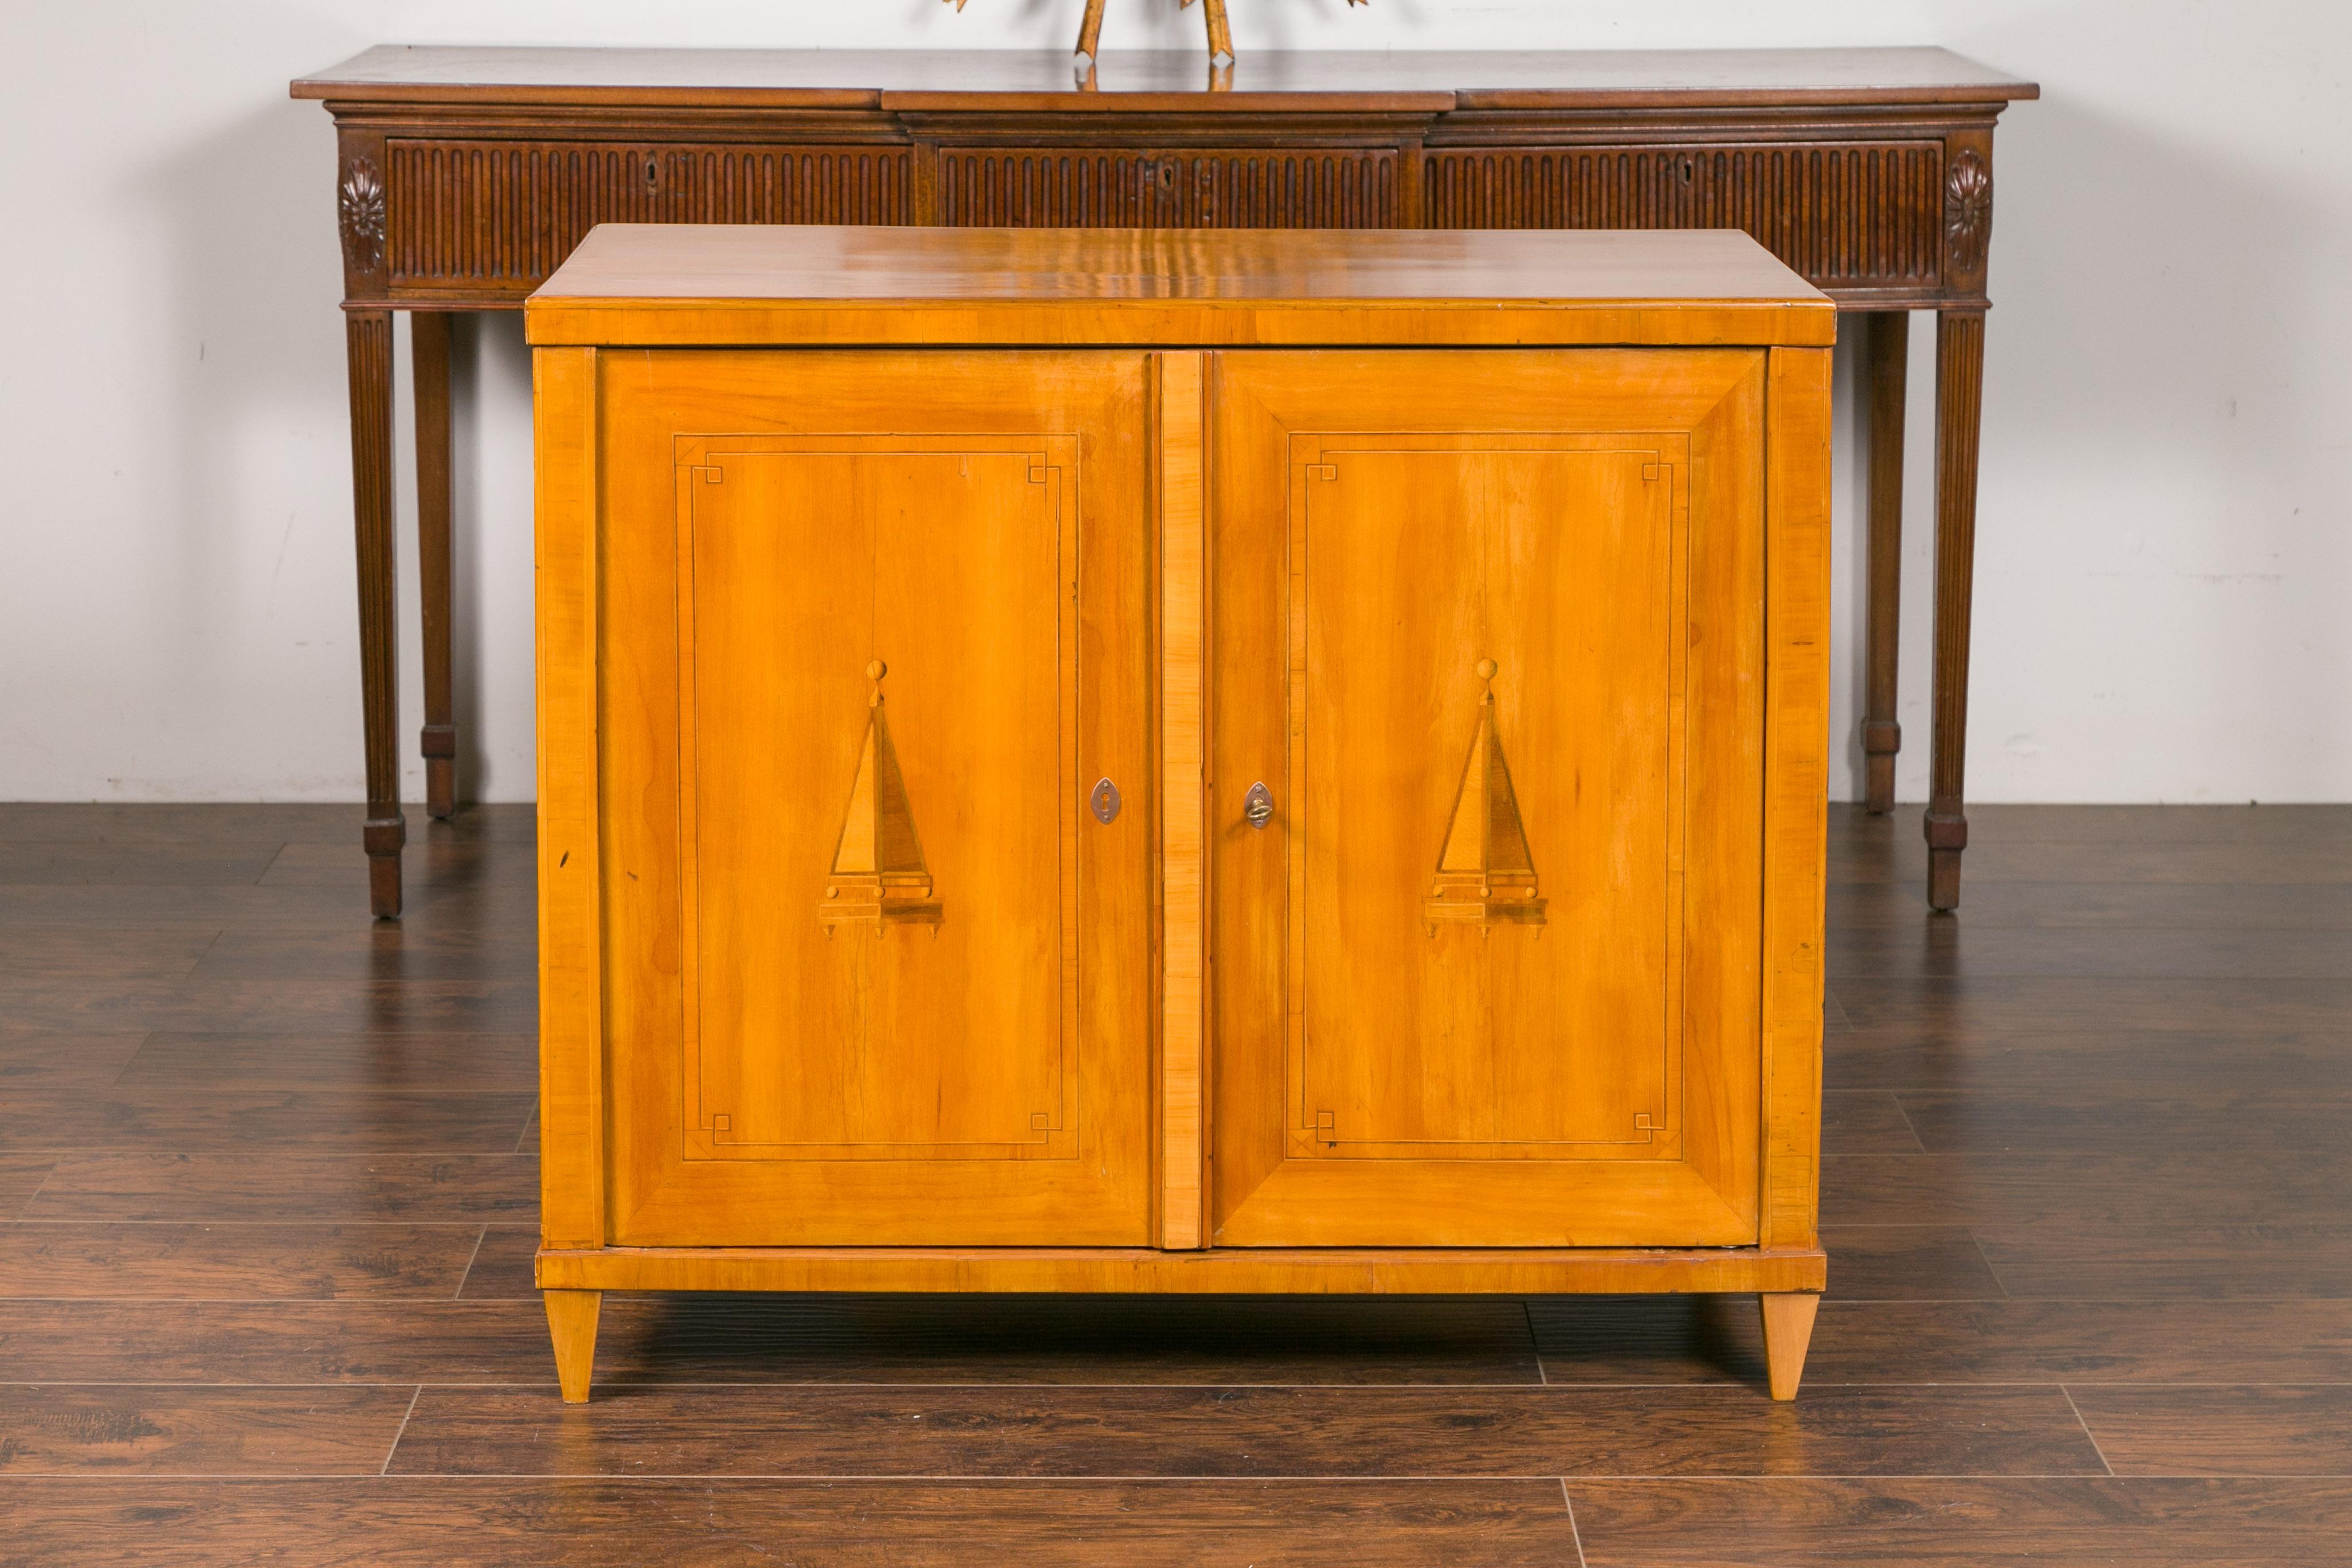 An Austrian Biedermeier period walnut buffet from the mid-19th century, with marquetry motifs and tapered feet. Created in Imperial Austria during the second quarter of the 19th century, this Biedermeier buffet features a rectangular planked top